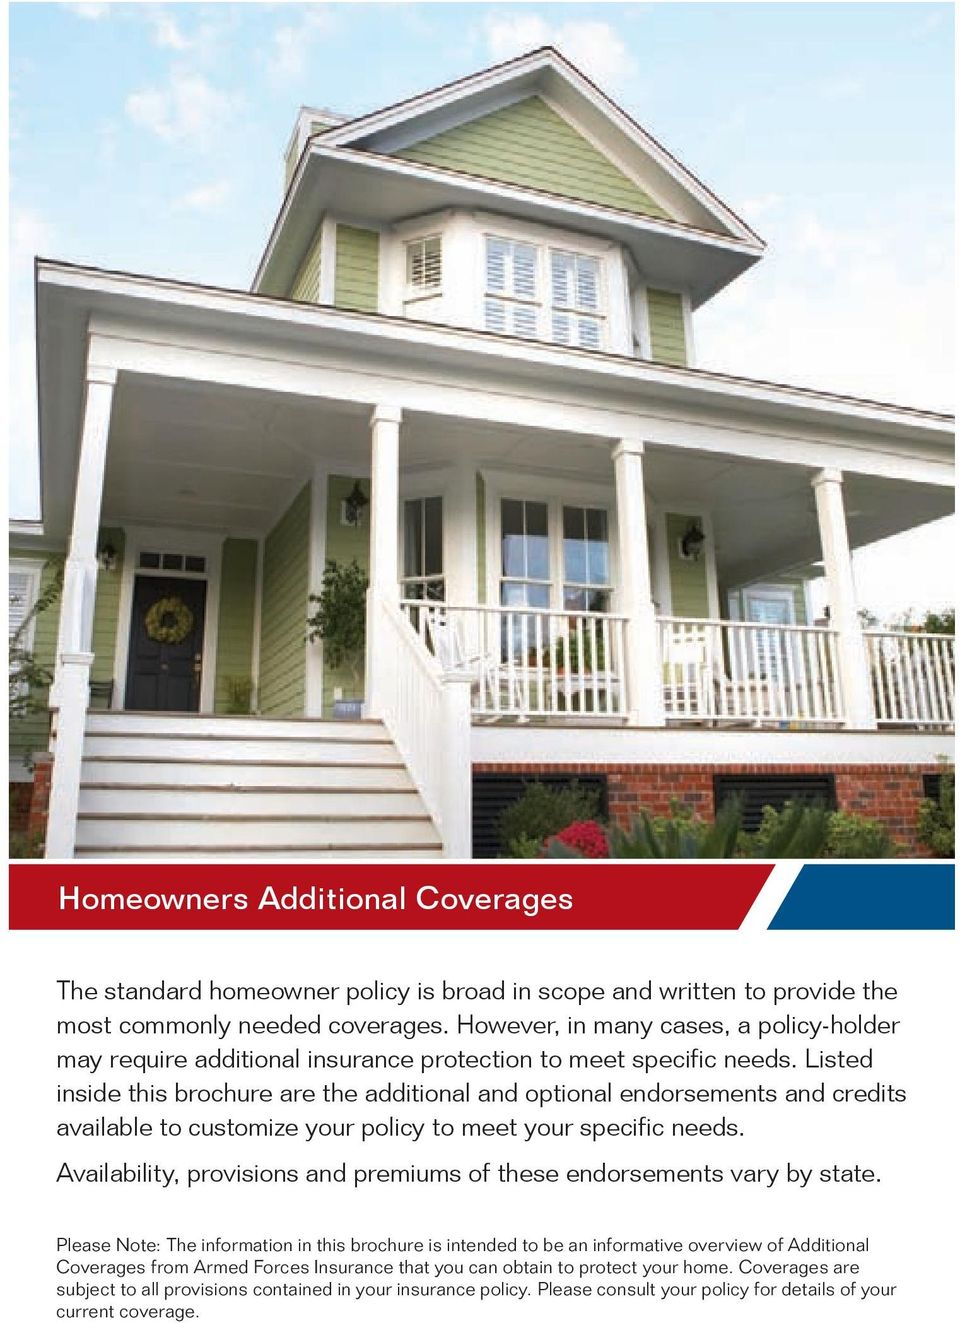 Listed inside this brochure are the additional and optional endorsements and credits available to customize your policy to meet your specific needs.